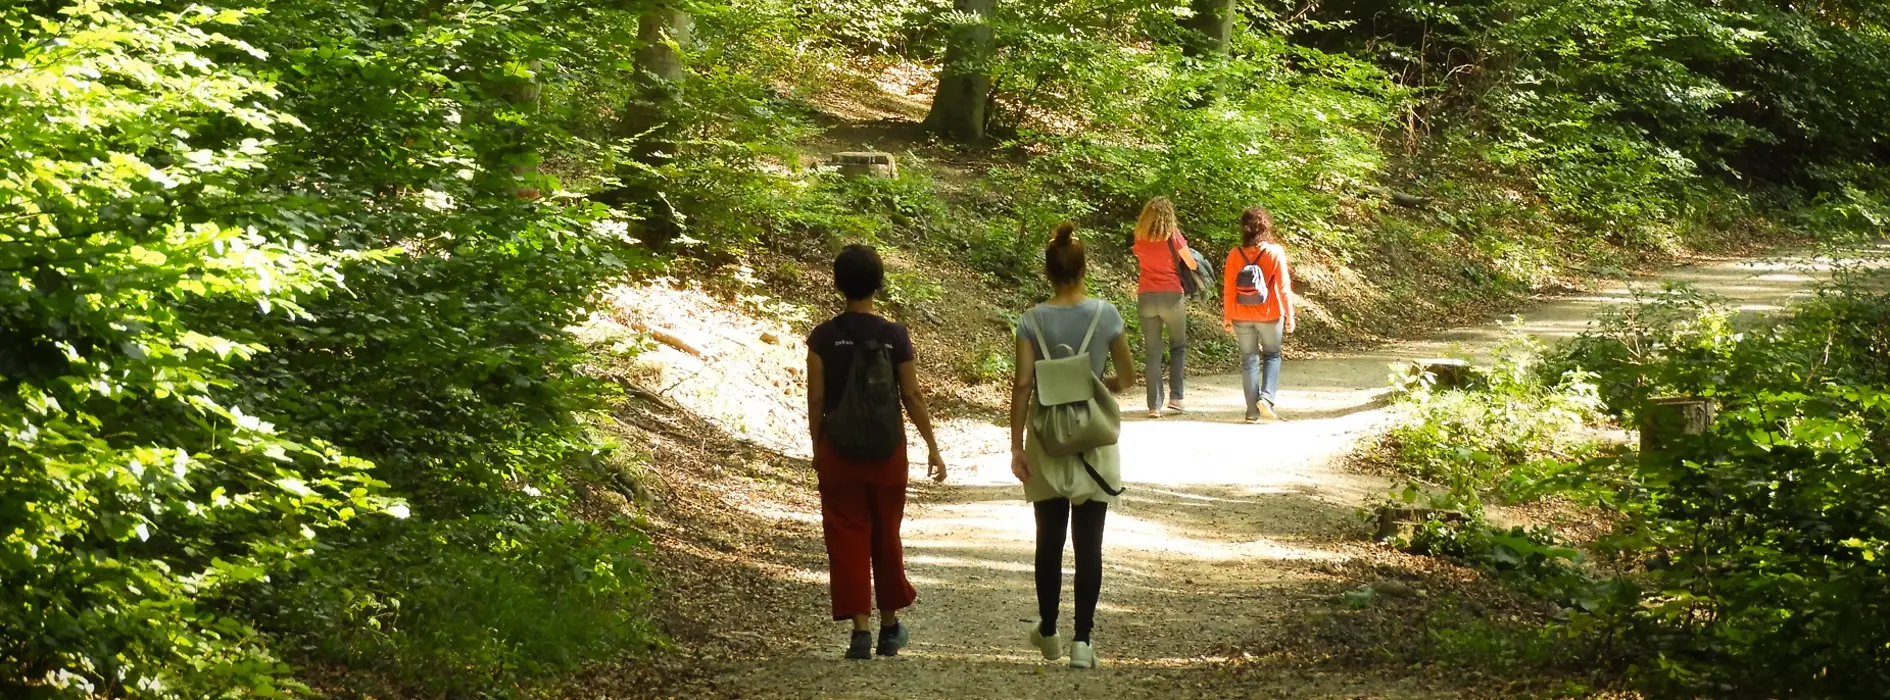 People on a hiking trail